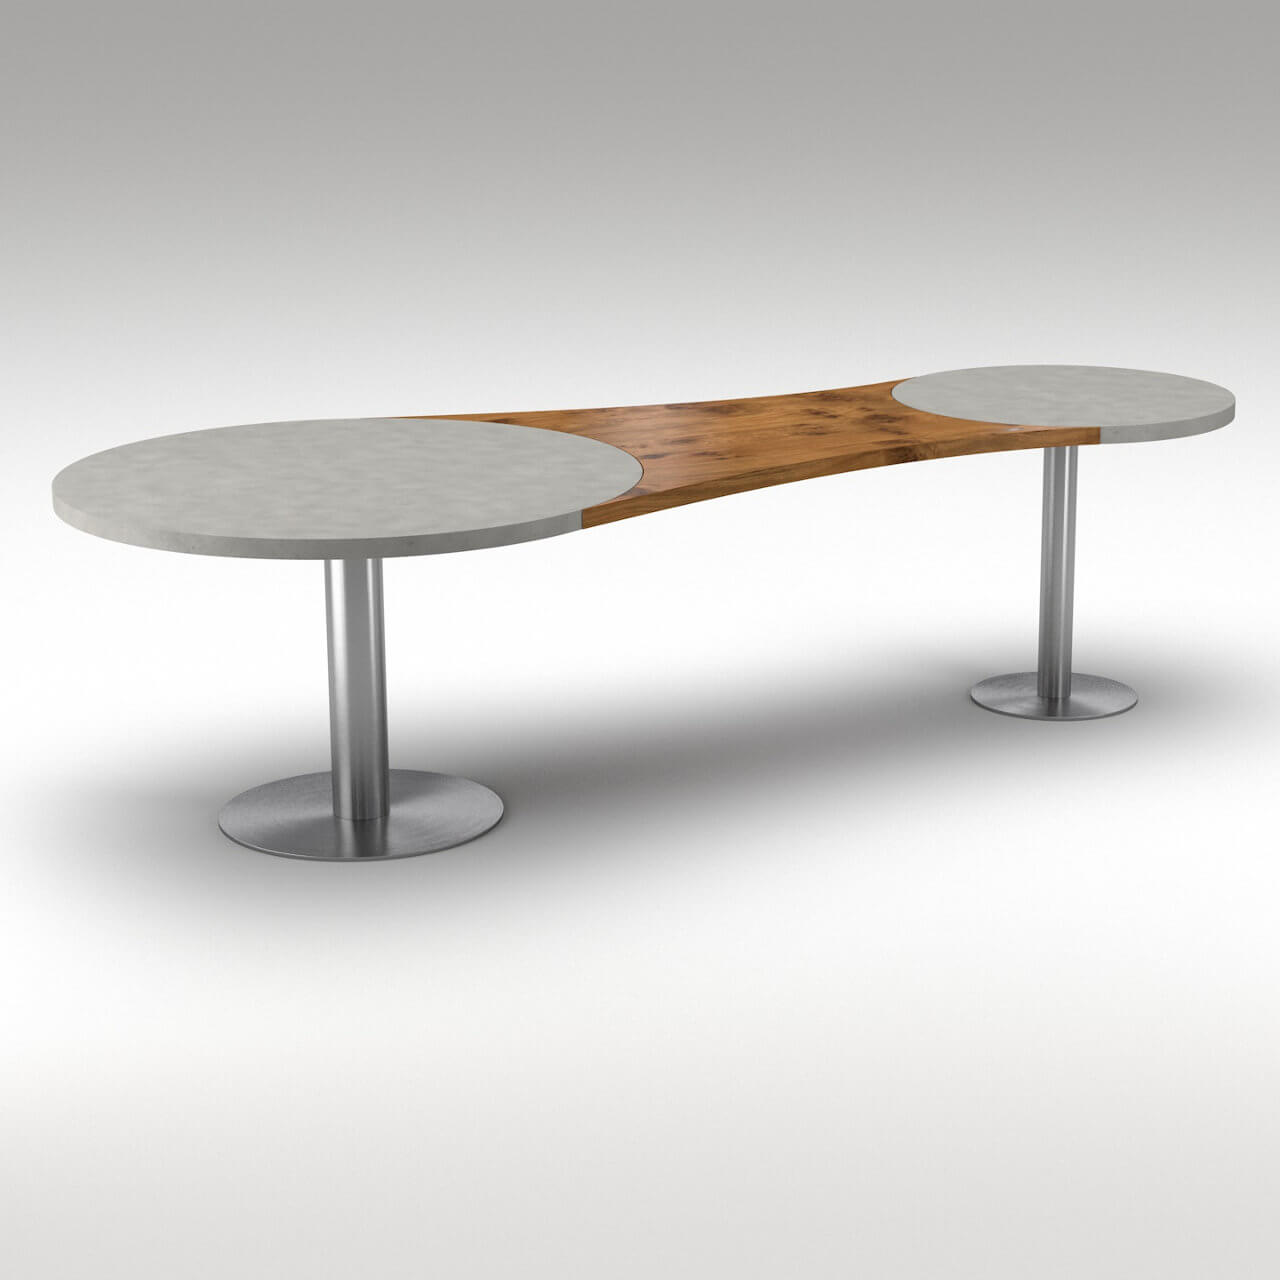 Modern office desk bespoke design made of natural concrete and premium solid wood with steel feet